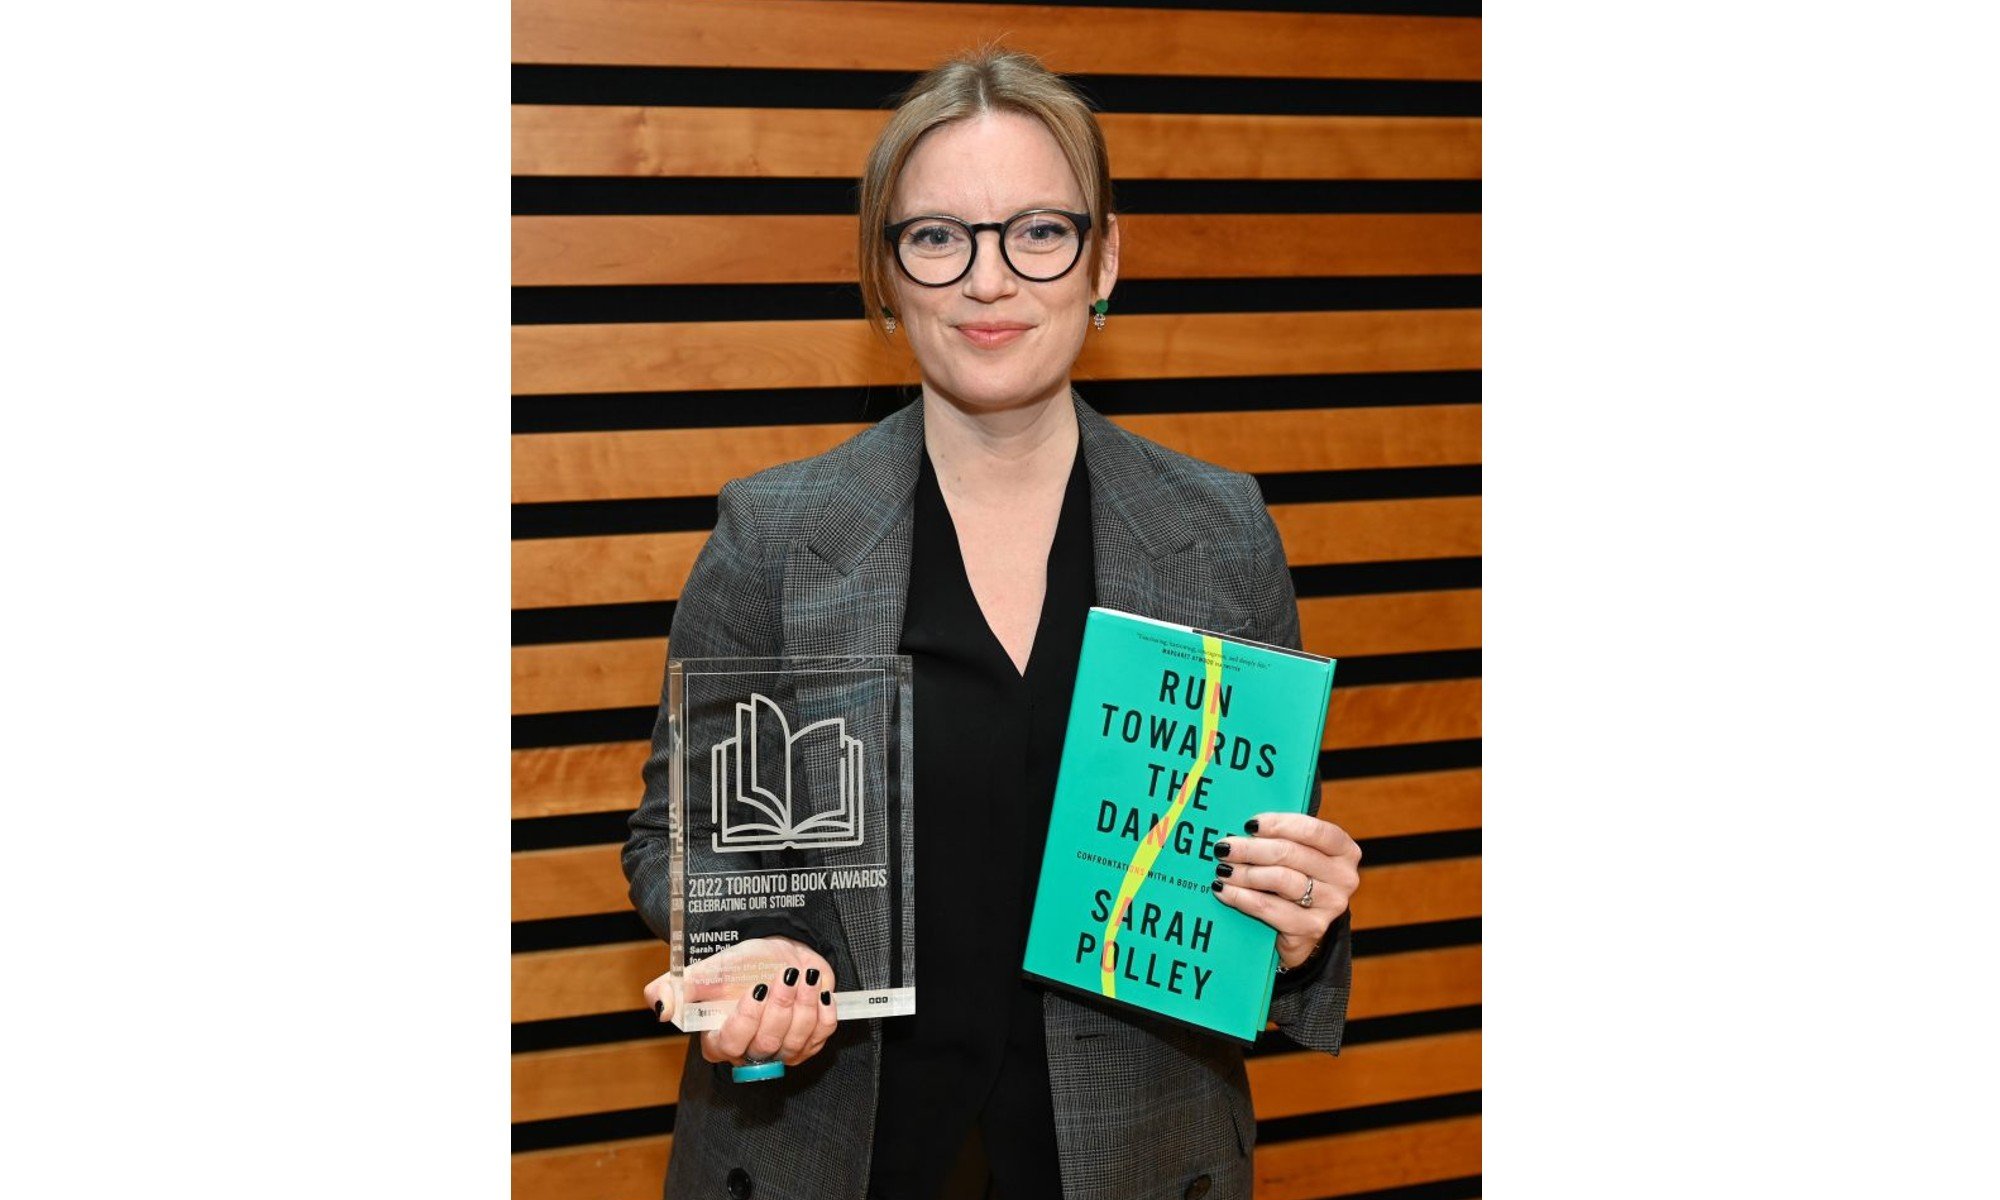 A woman blonde woman wearing glasses holds a book and an award made of glass.